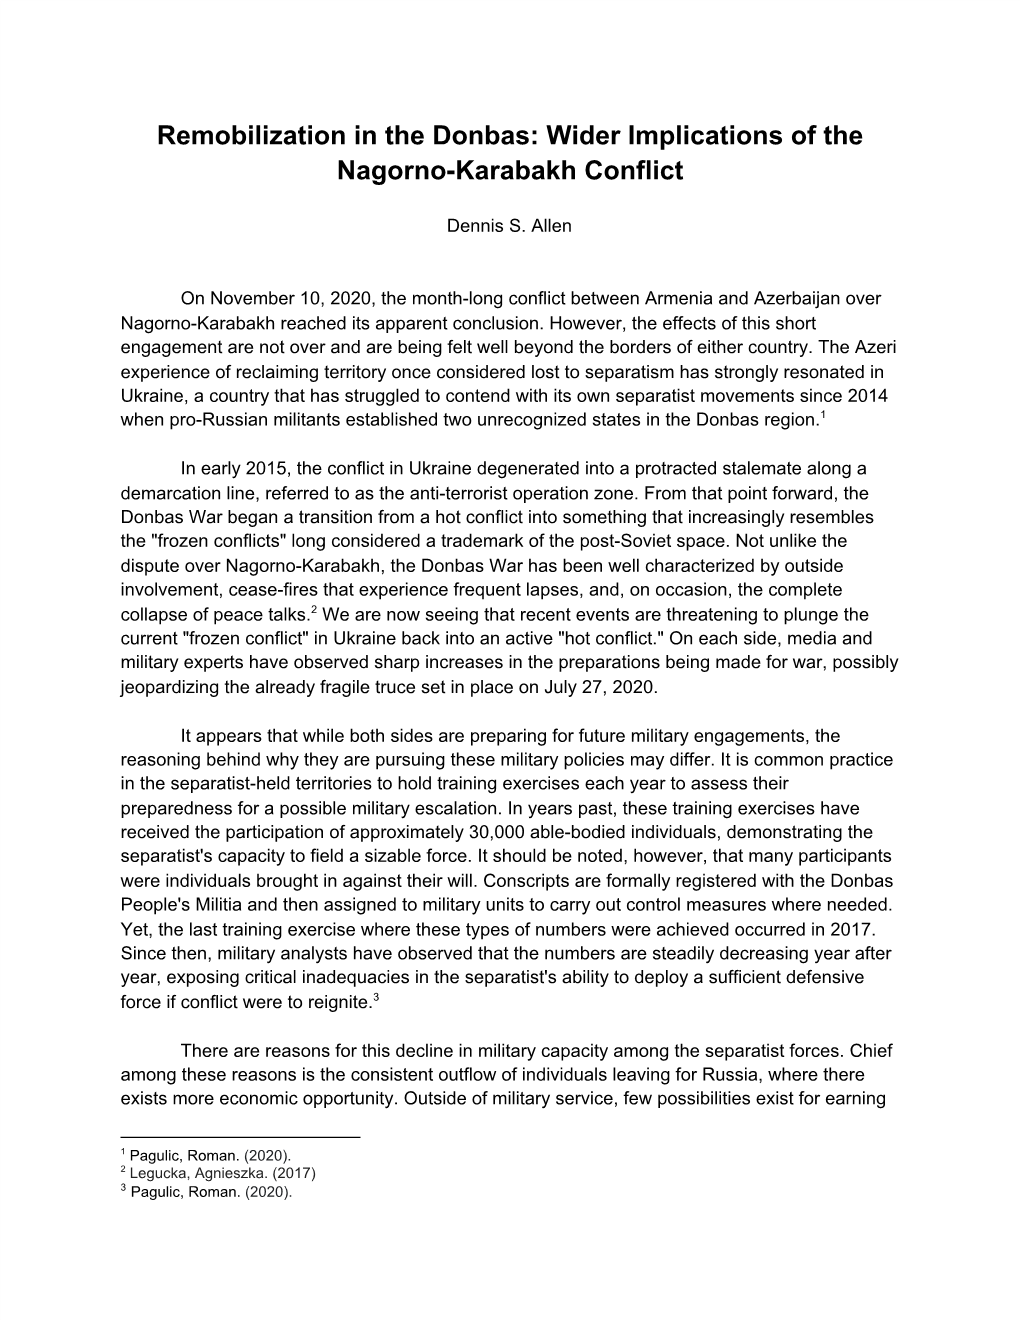 Wider Implications of the Nagorno-Karabakh Conflict